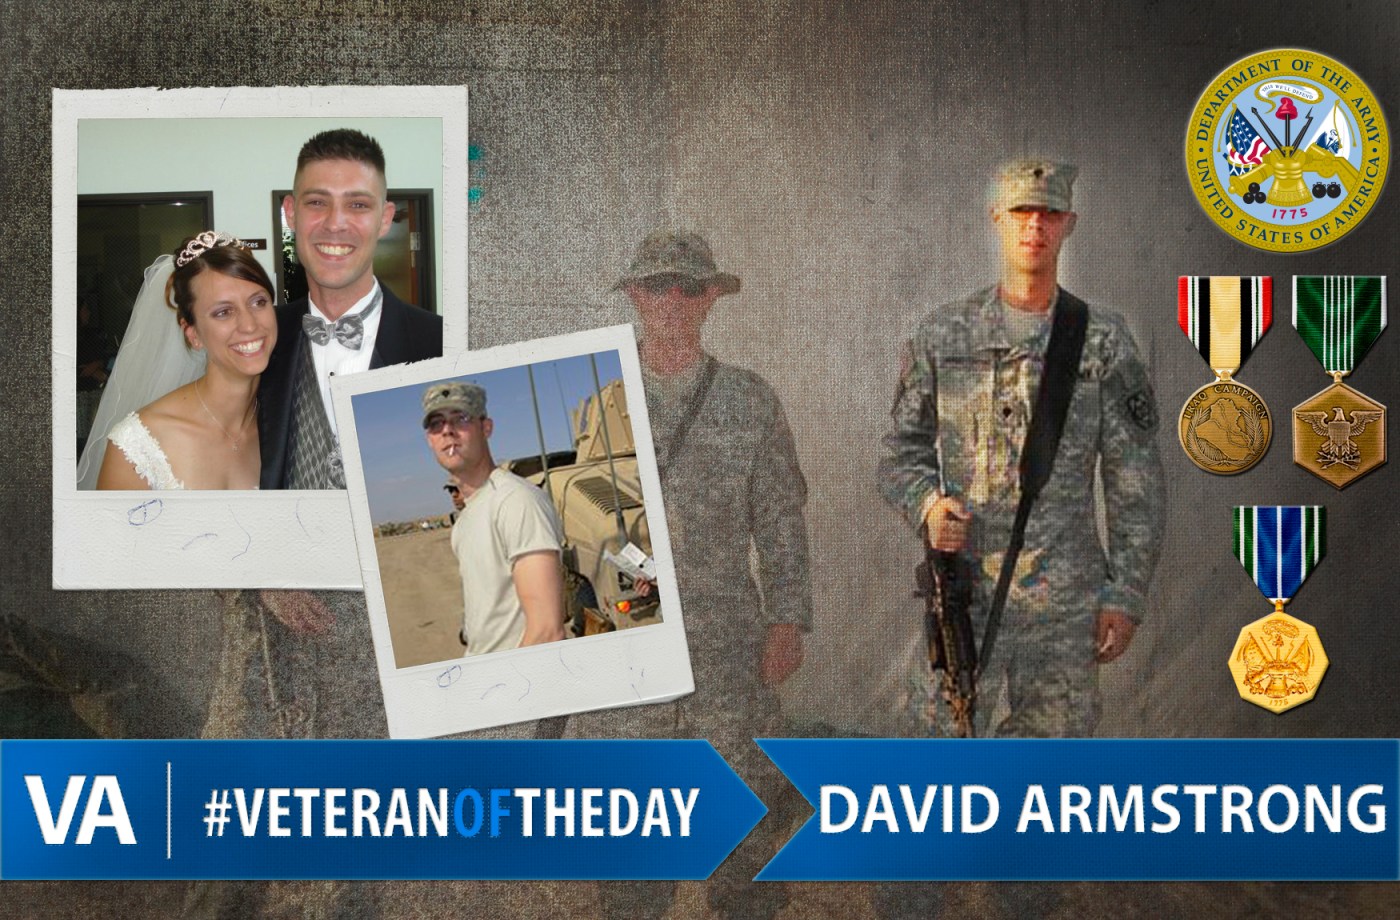 David Armstrong - Veteran of the Day